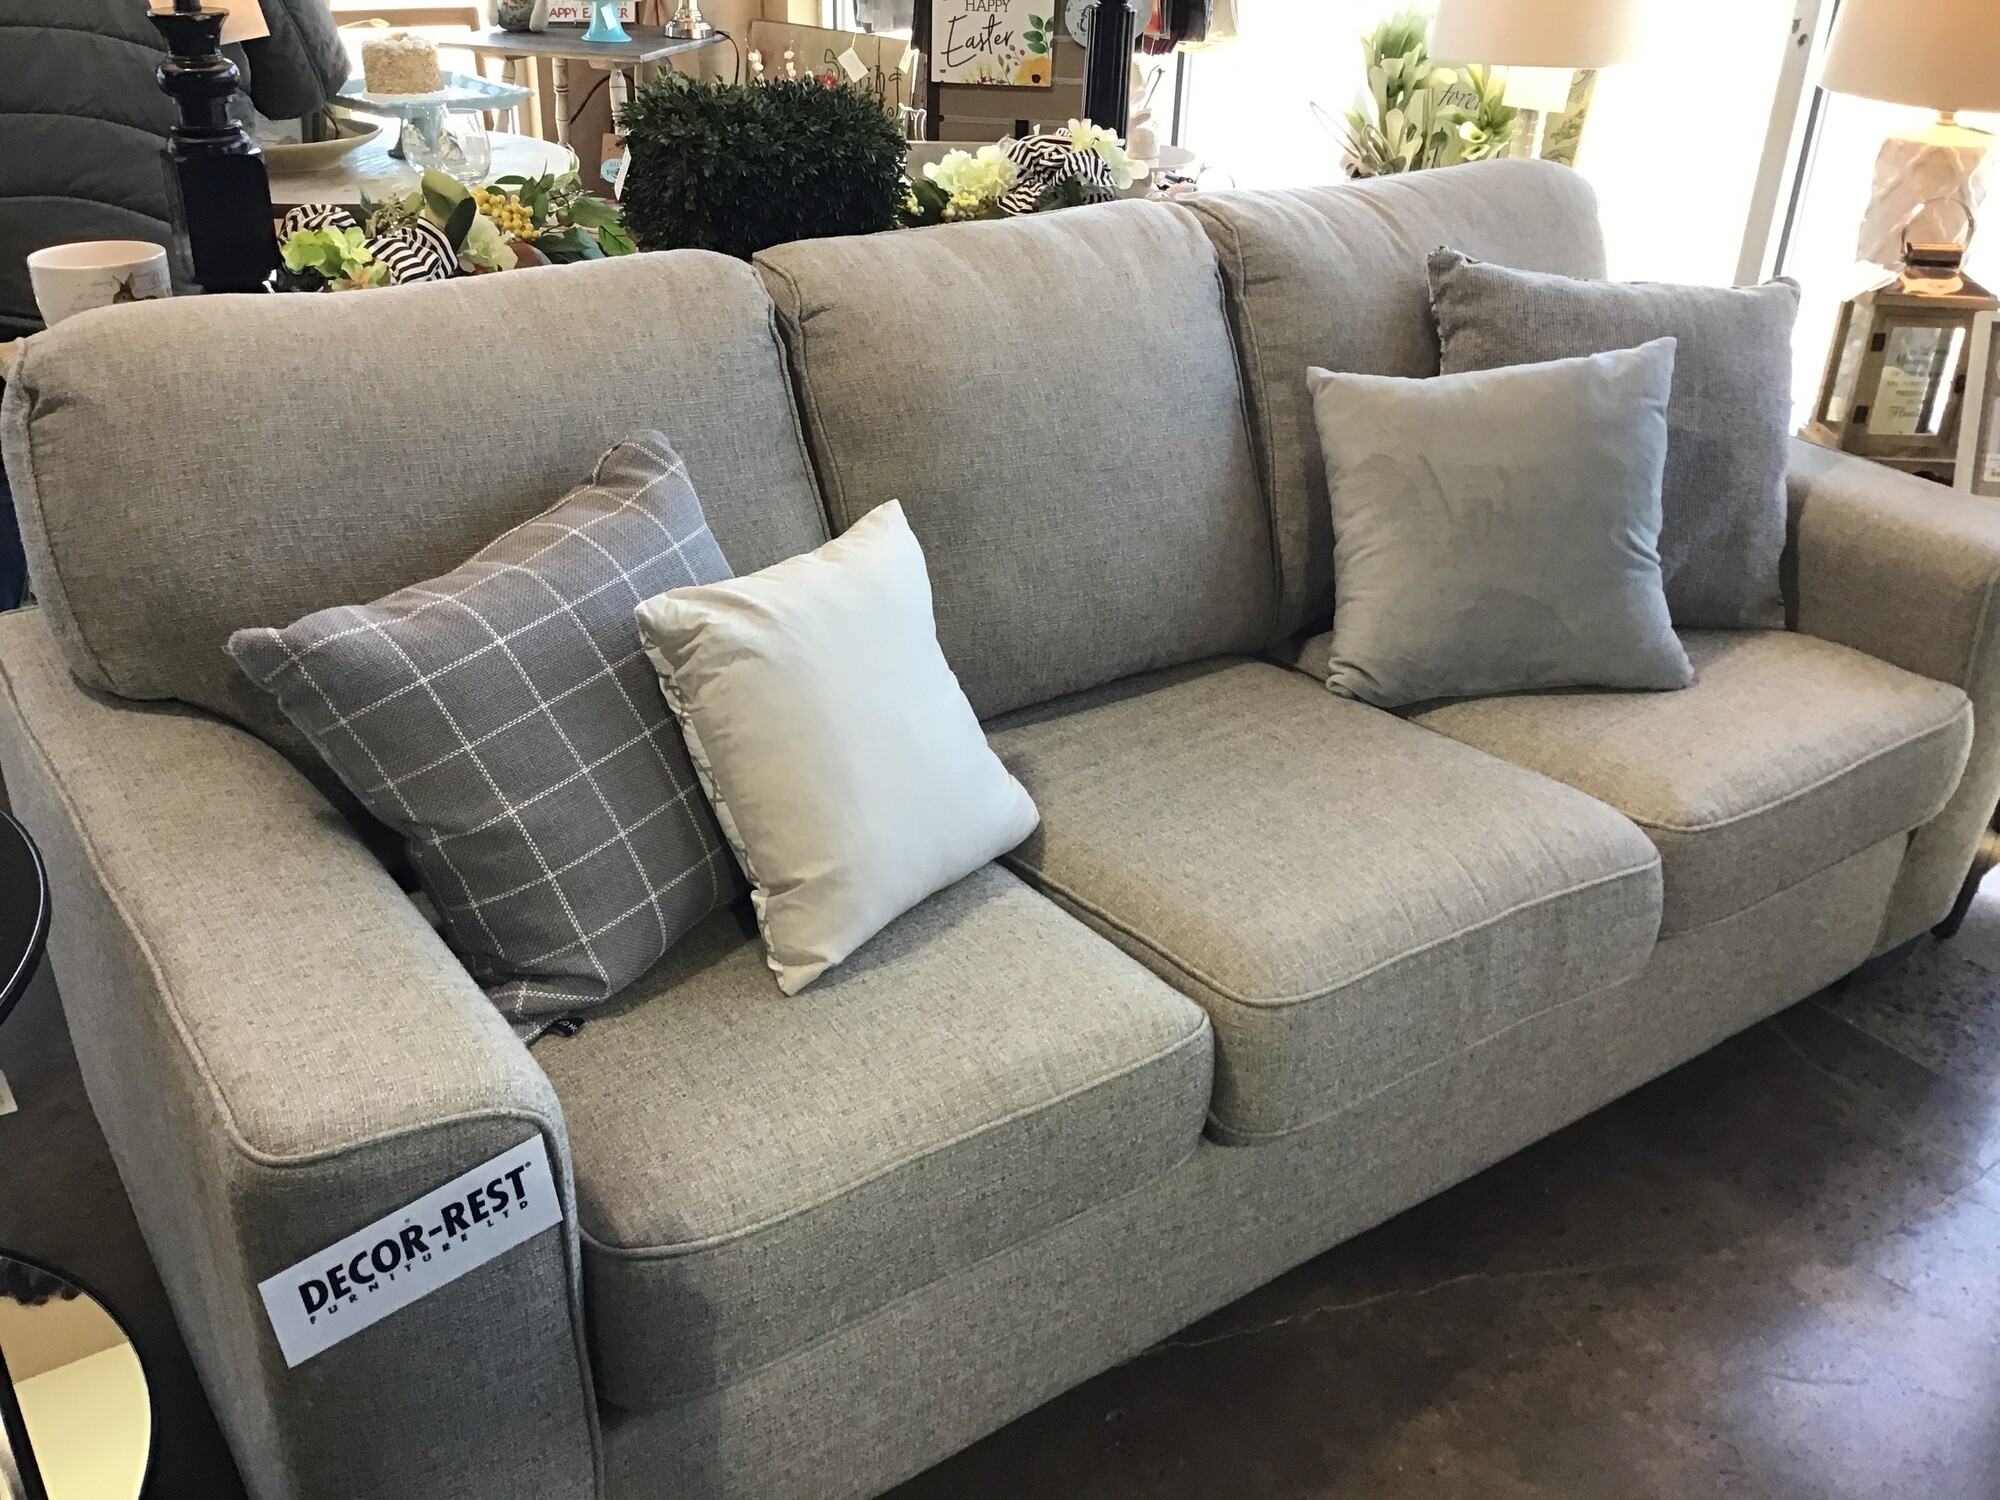 This beautiful neutral sofa is in excellent condition and very comfortable! It features 3 flippable seat cushions and stationary back cushions. The fabric is a gray/cream tweed. Great piece for your family room, game room or living room.
Dimensions are 85 in x 39 in x 38 in